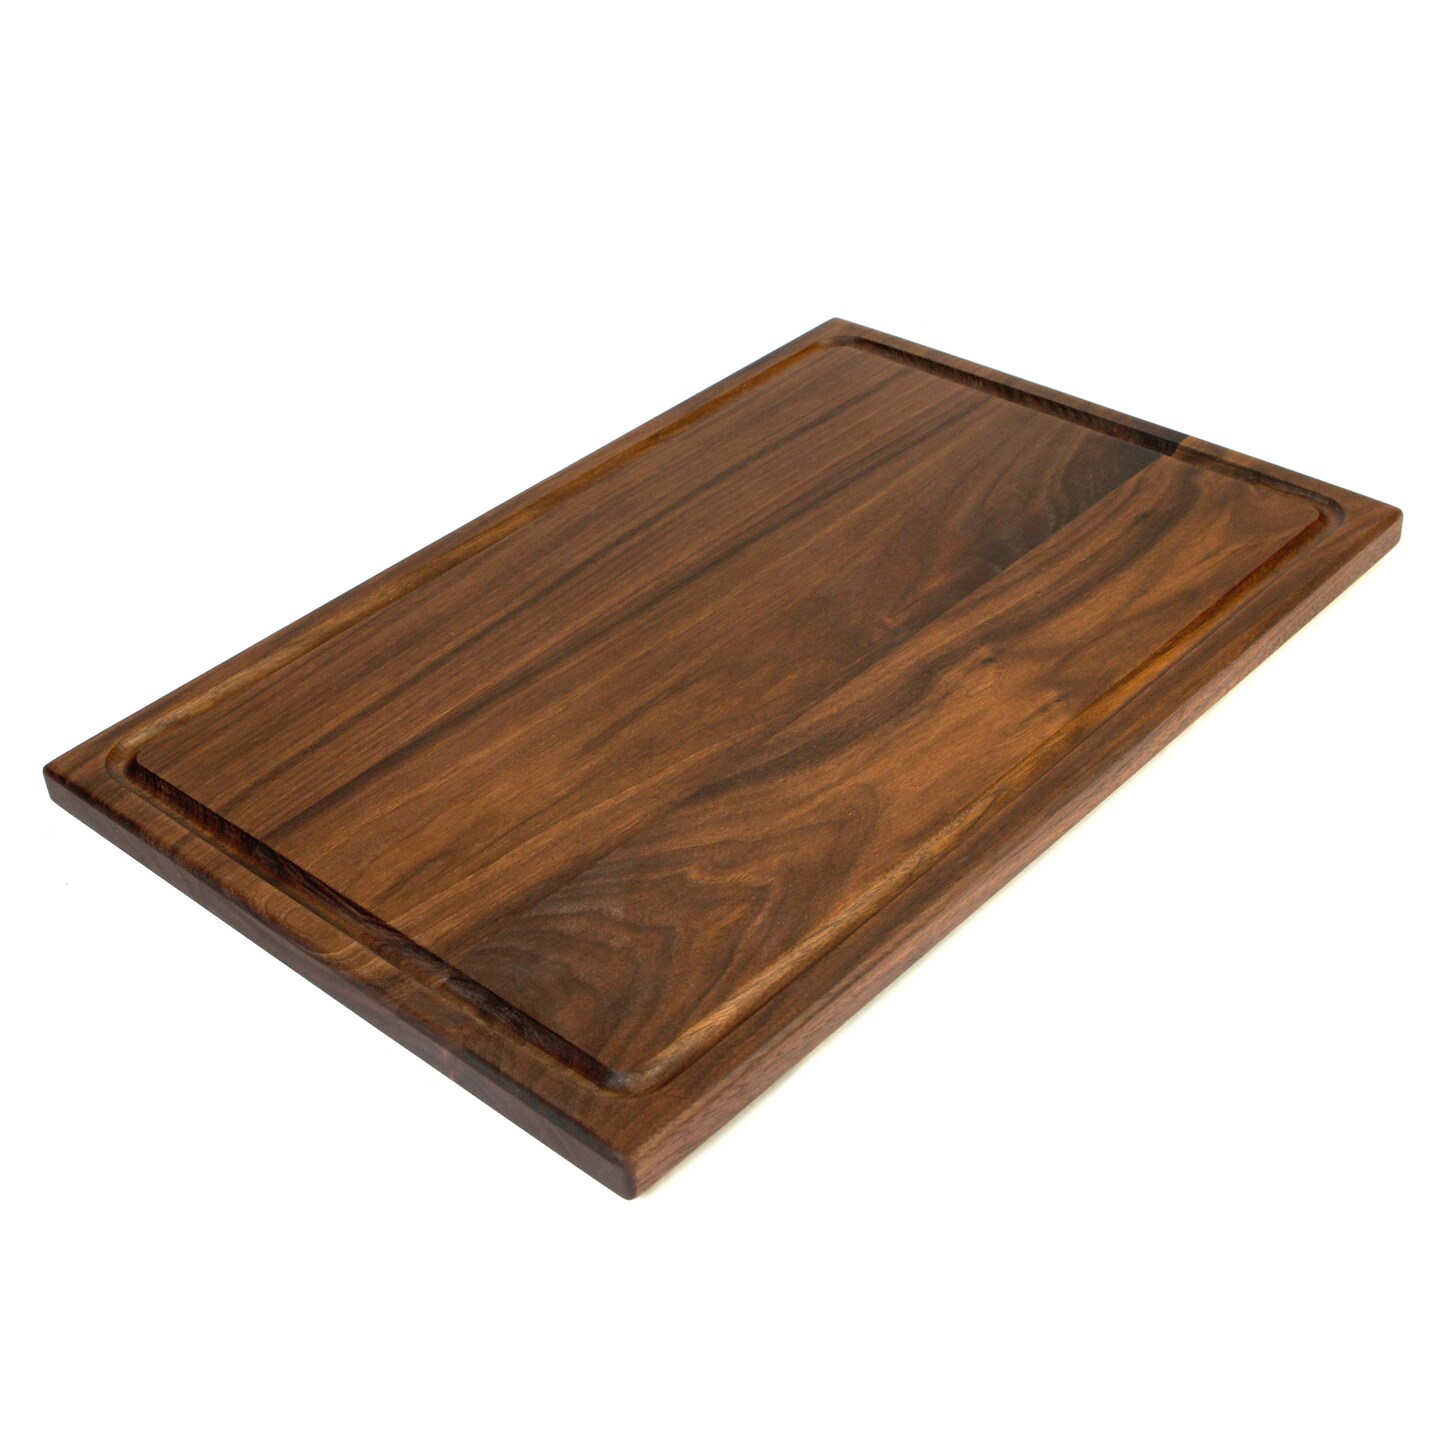 Wood Cutting Board for Kitchen, Dishwasher Safe, Dual-Sided with Juice  Groove 14.5 x 11, 14.5-Inch x 11-Inch - Kroger